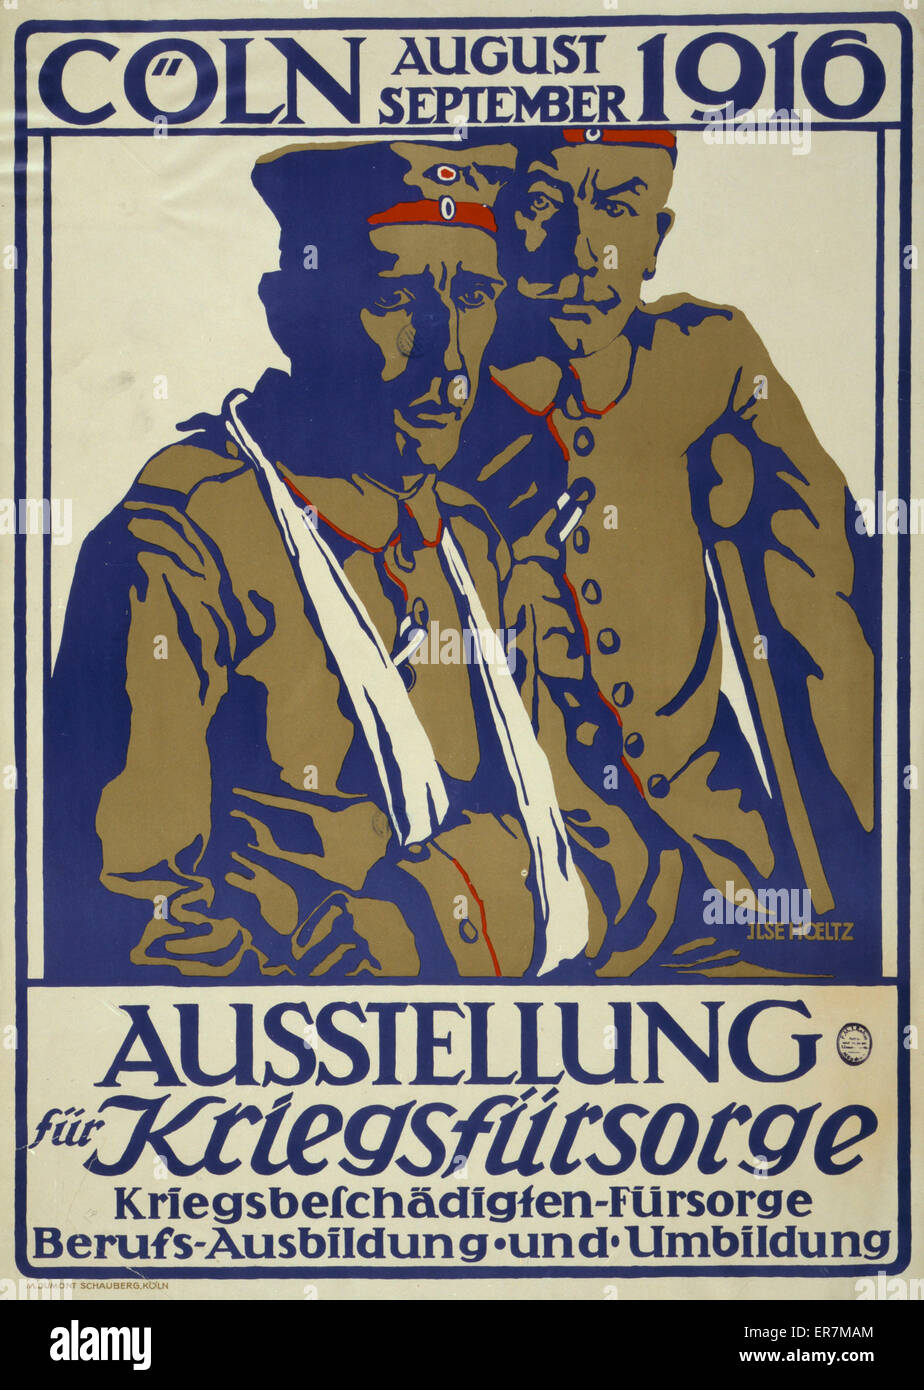 Ausstellung fur Kriegsfursorge, Coln, August-September 1916; Kriegsbeschadigten-fursorge, Berufs-Ausbildung und Umbildung. Poster shows two wounded German soldiers, one with arm in a sling, the other with a crutch. Text announces an exhibition in Cologne Stock Photo